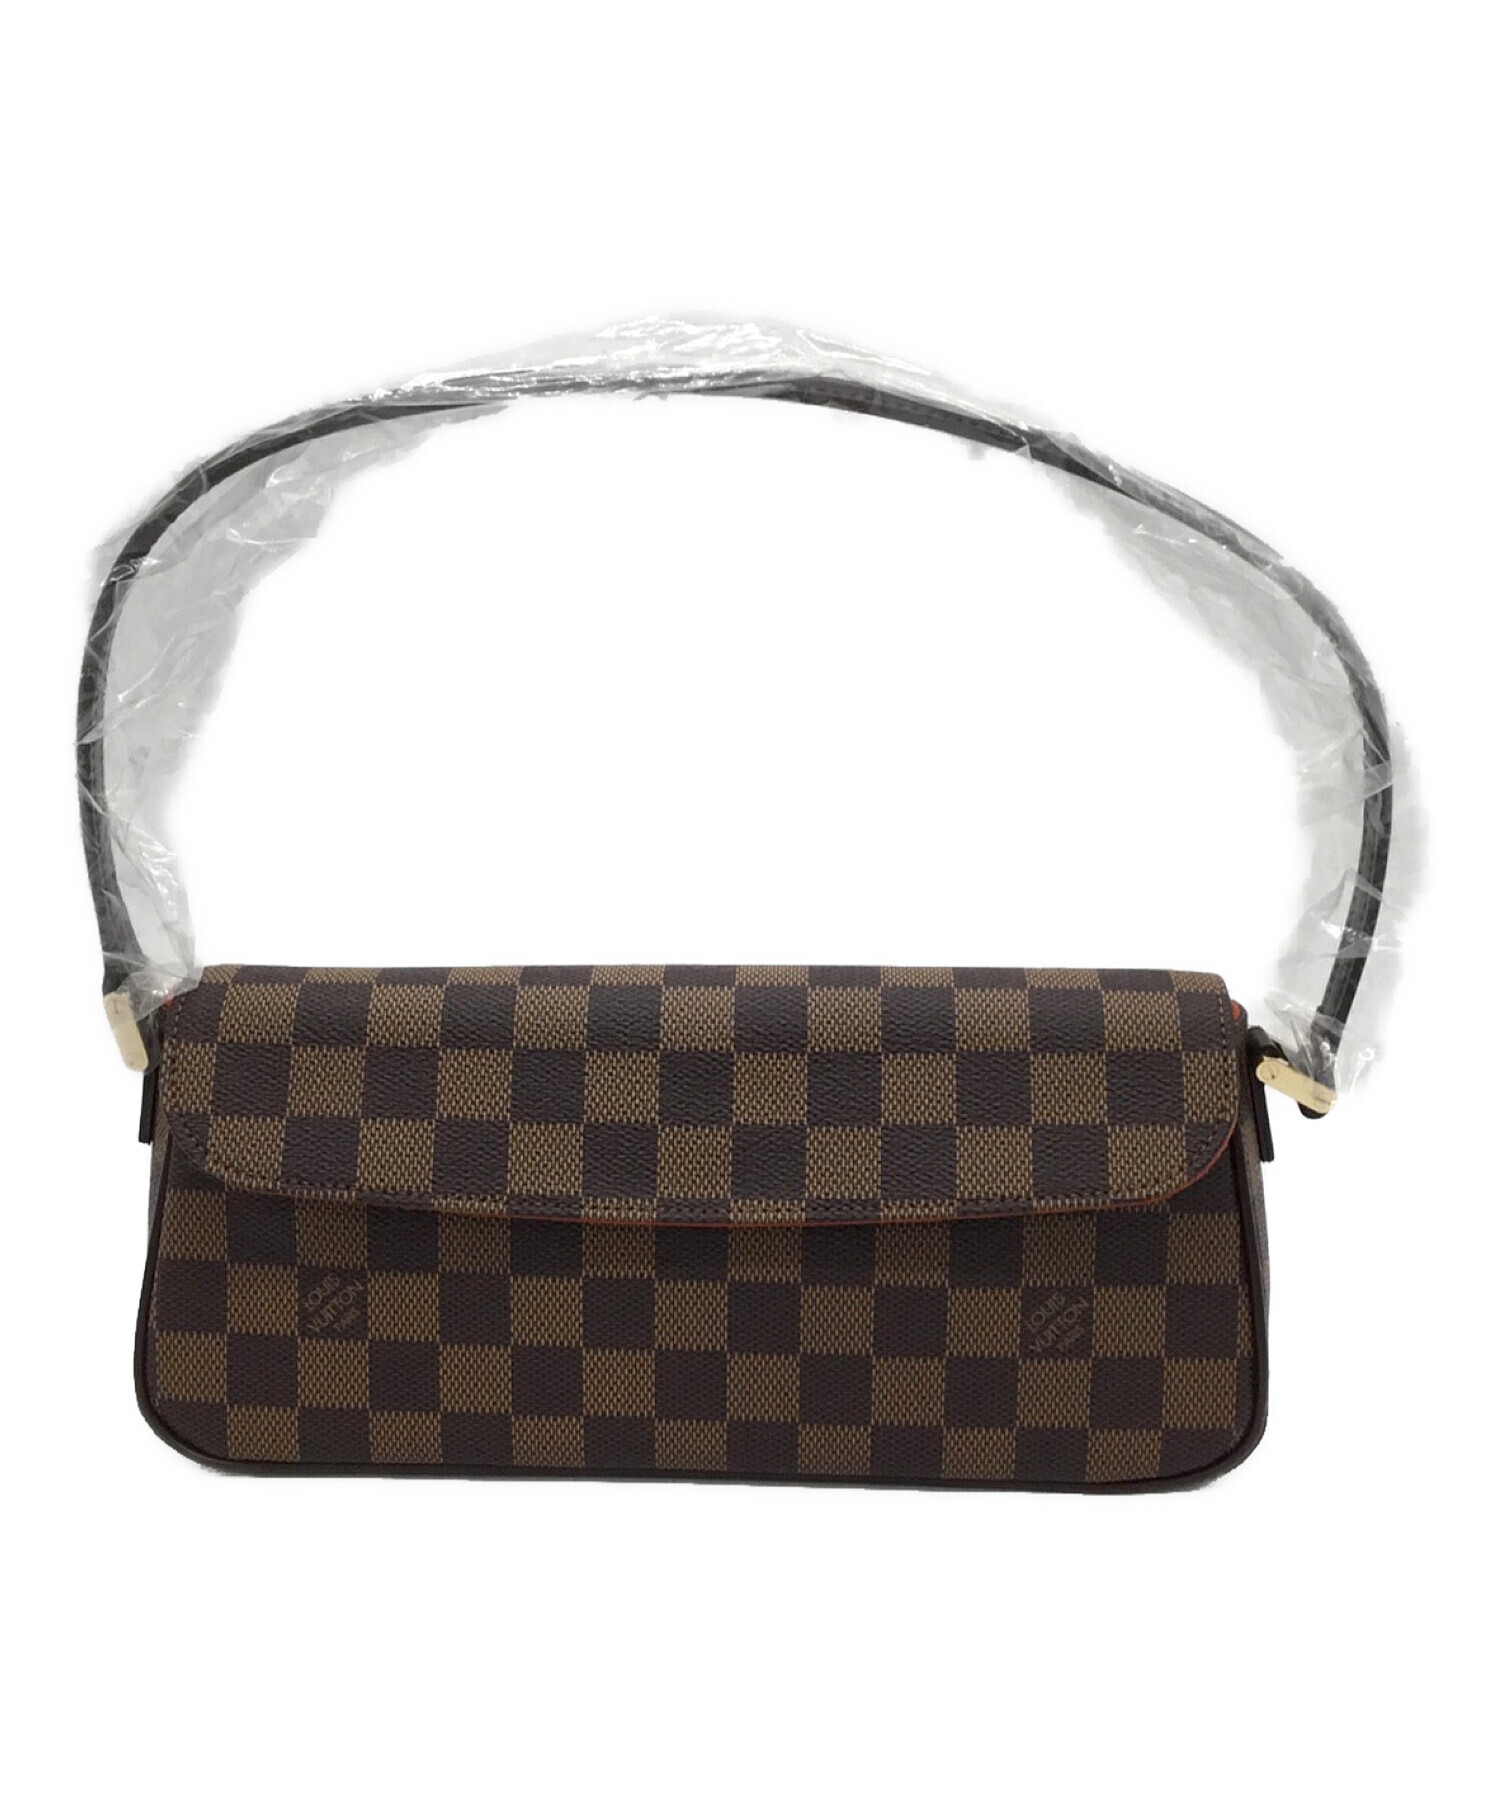 LOUIS VUITTON ルイヴィトン ダミエ レコレータ